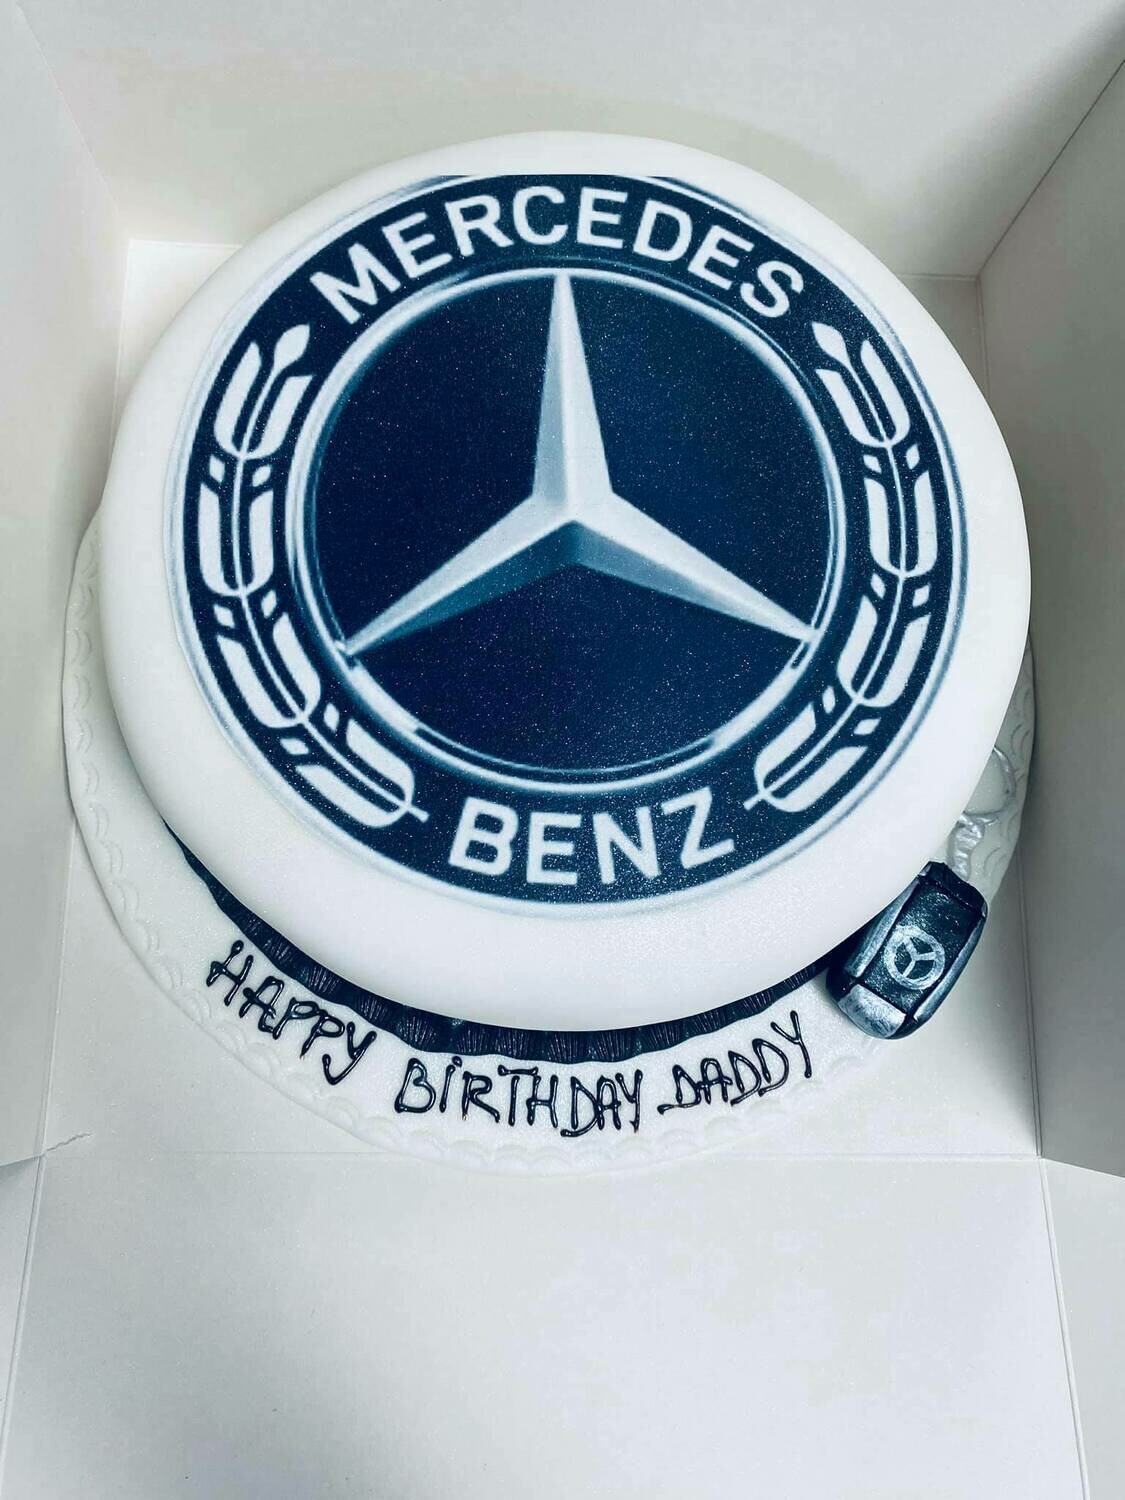 Mercedes-Benz - Decorated Cake by Daphne - CakesDecor